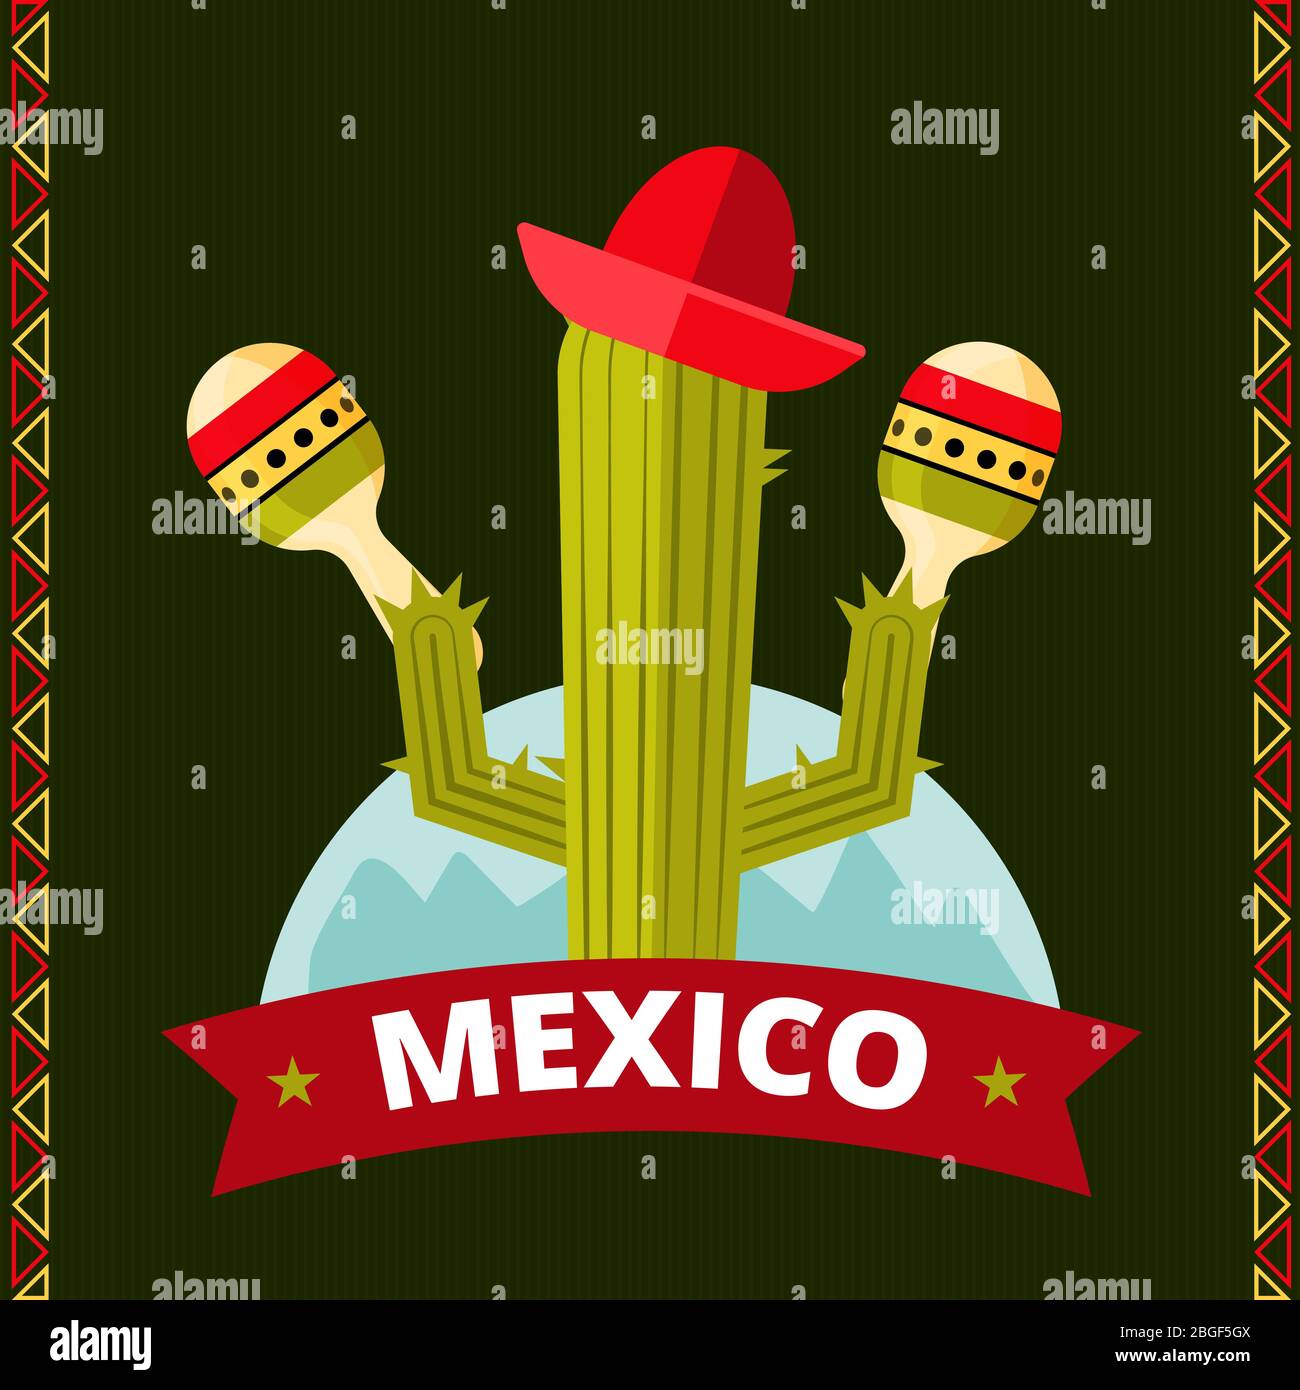 Funny mexican cactus poster design. Sombrero and green plant. Vector illustration Stock Vector